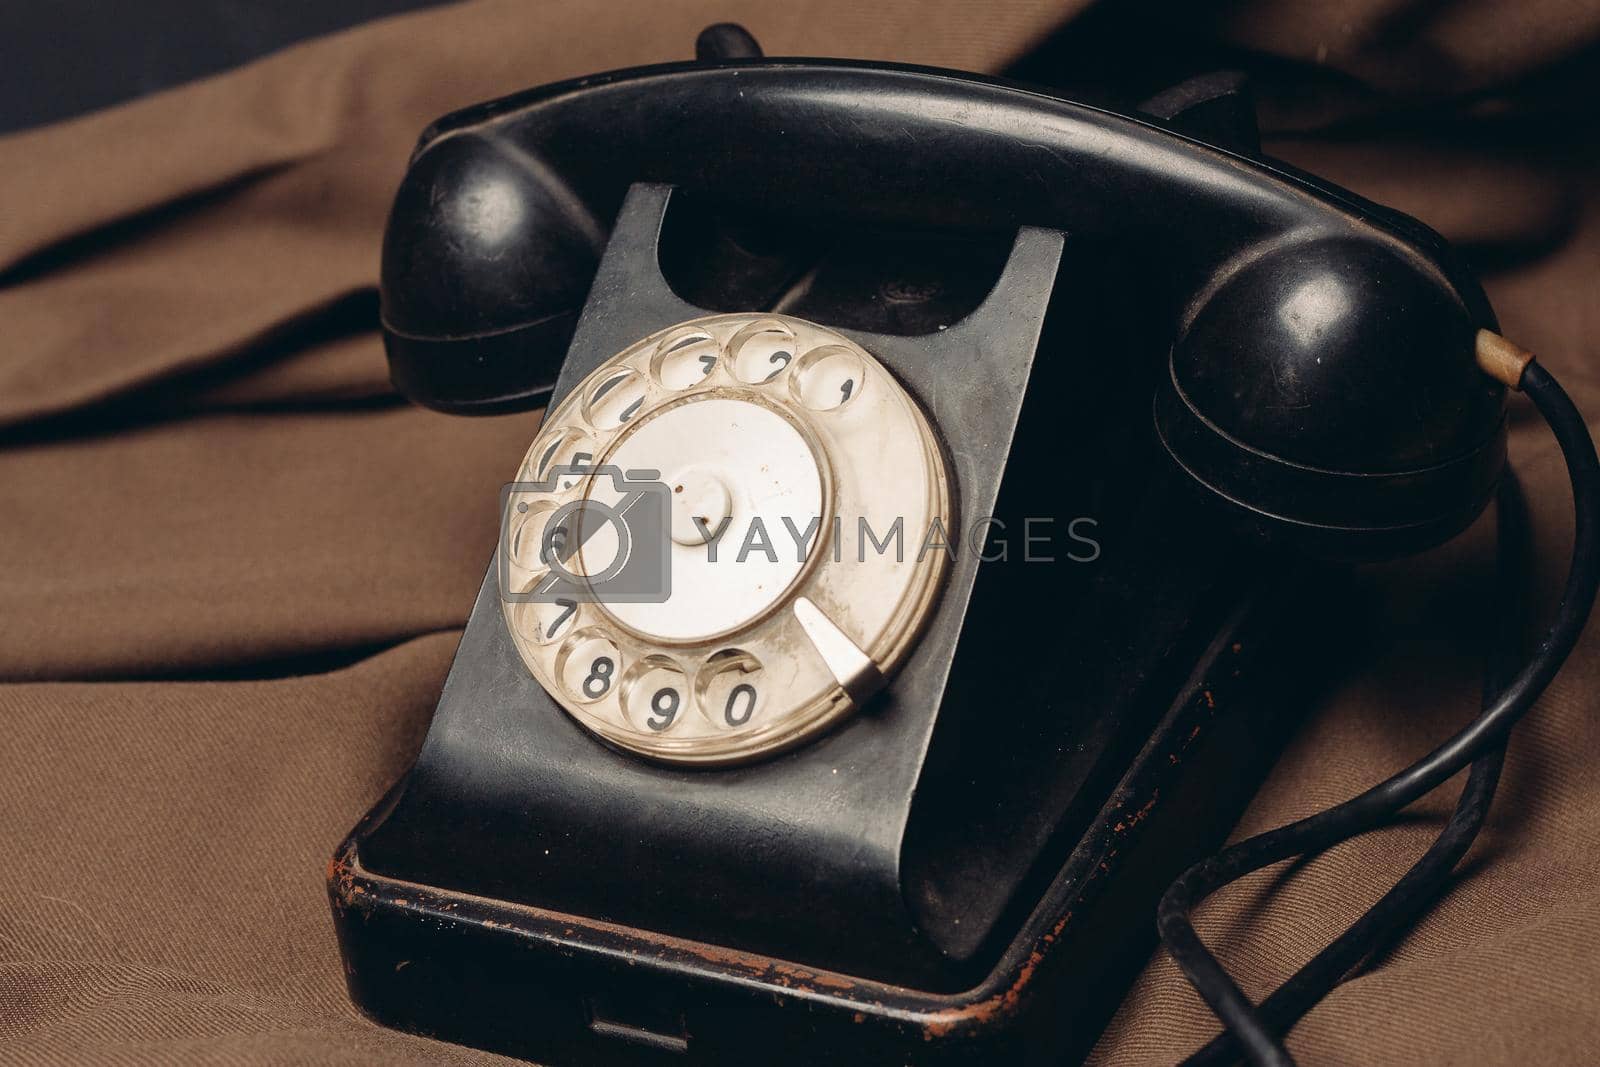 telephone vintage technology old style communication brown cloth. High quality photo